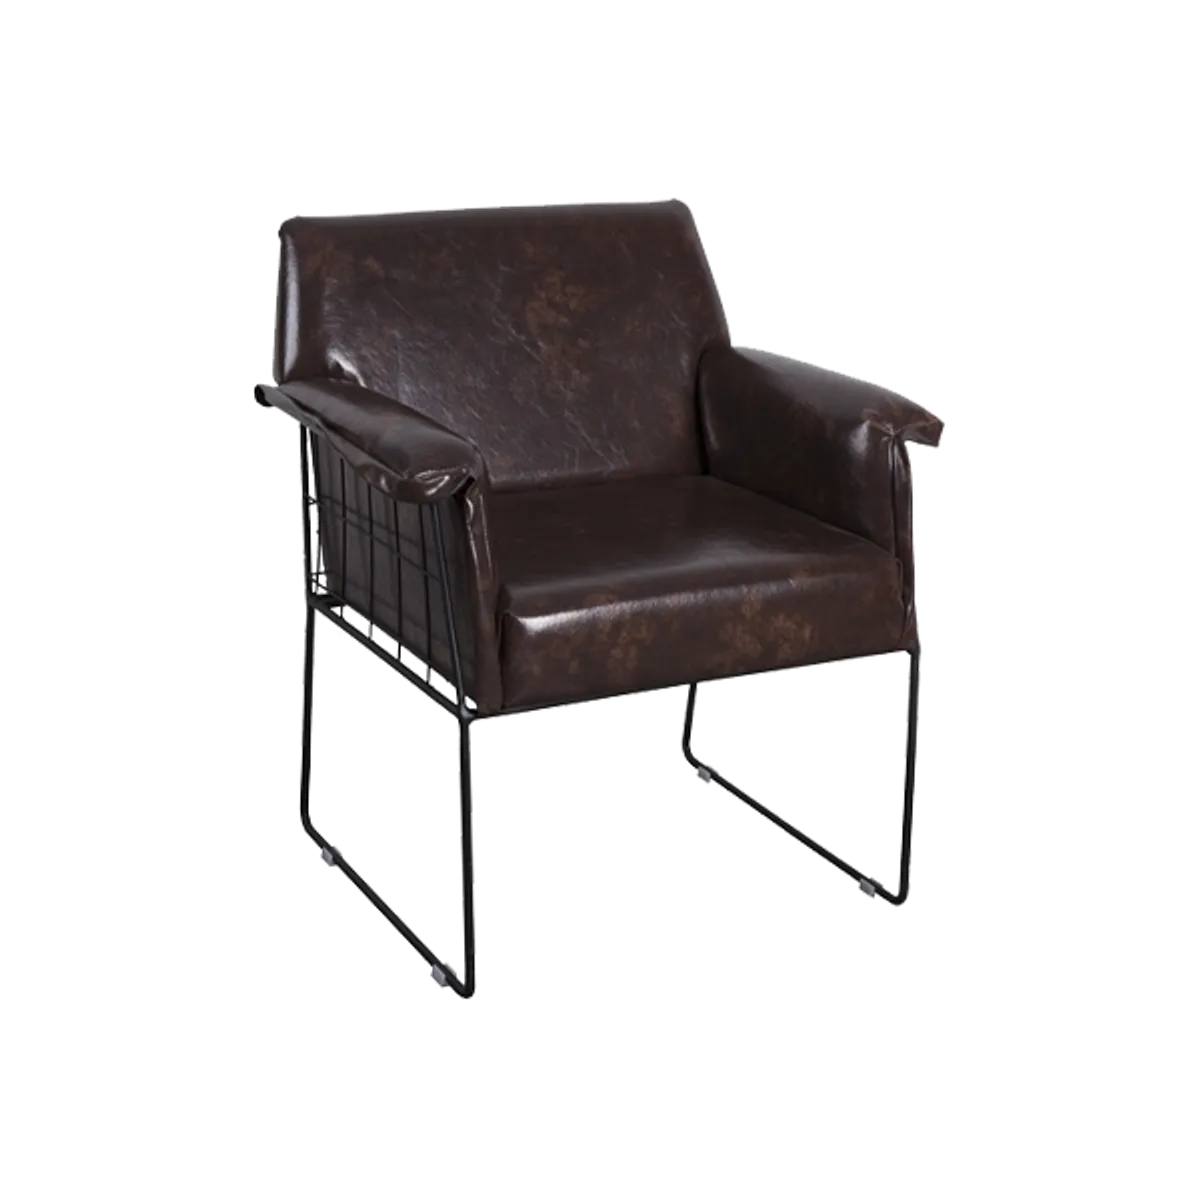 Hawk Armchair Cage Metal Frame Inside Out Contracts